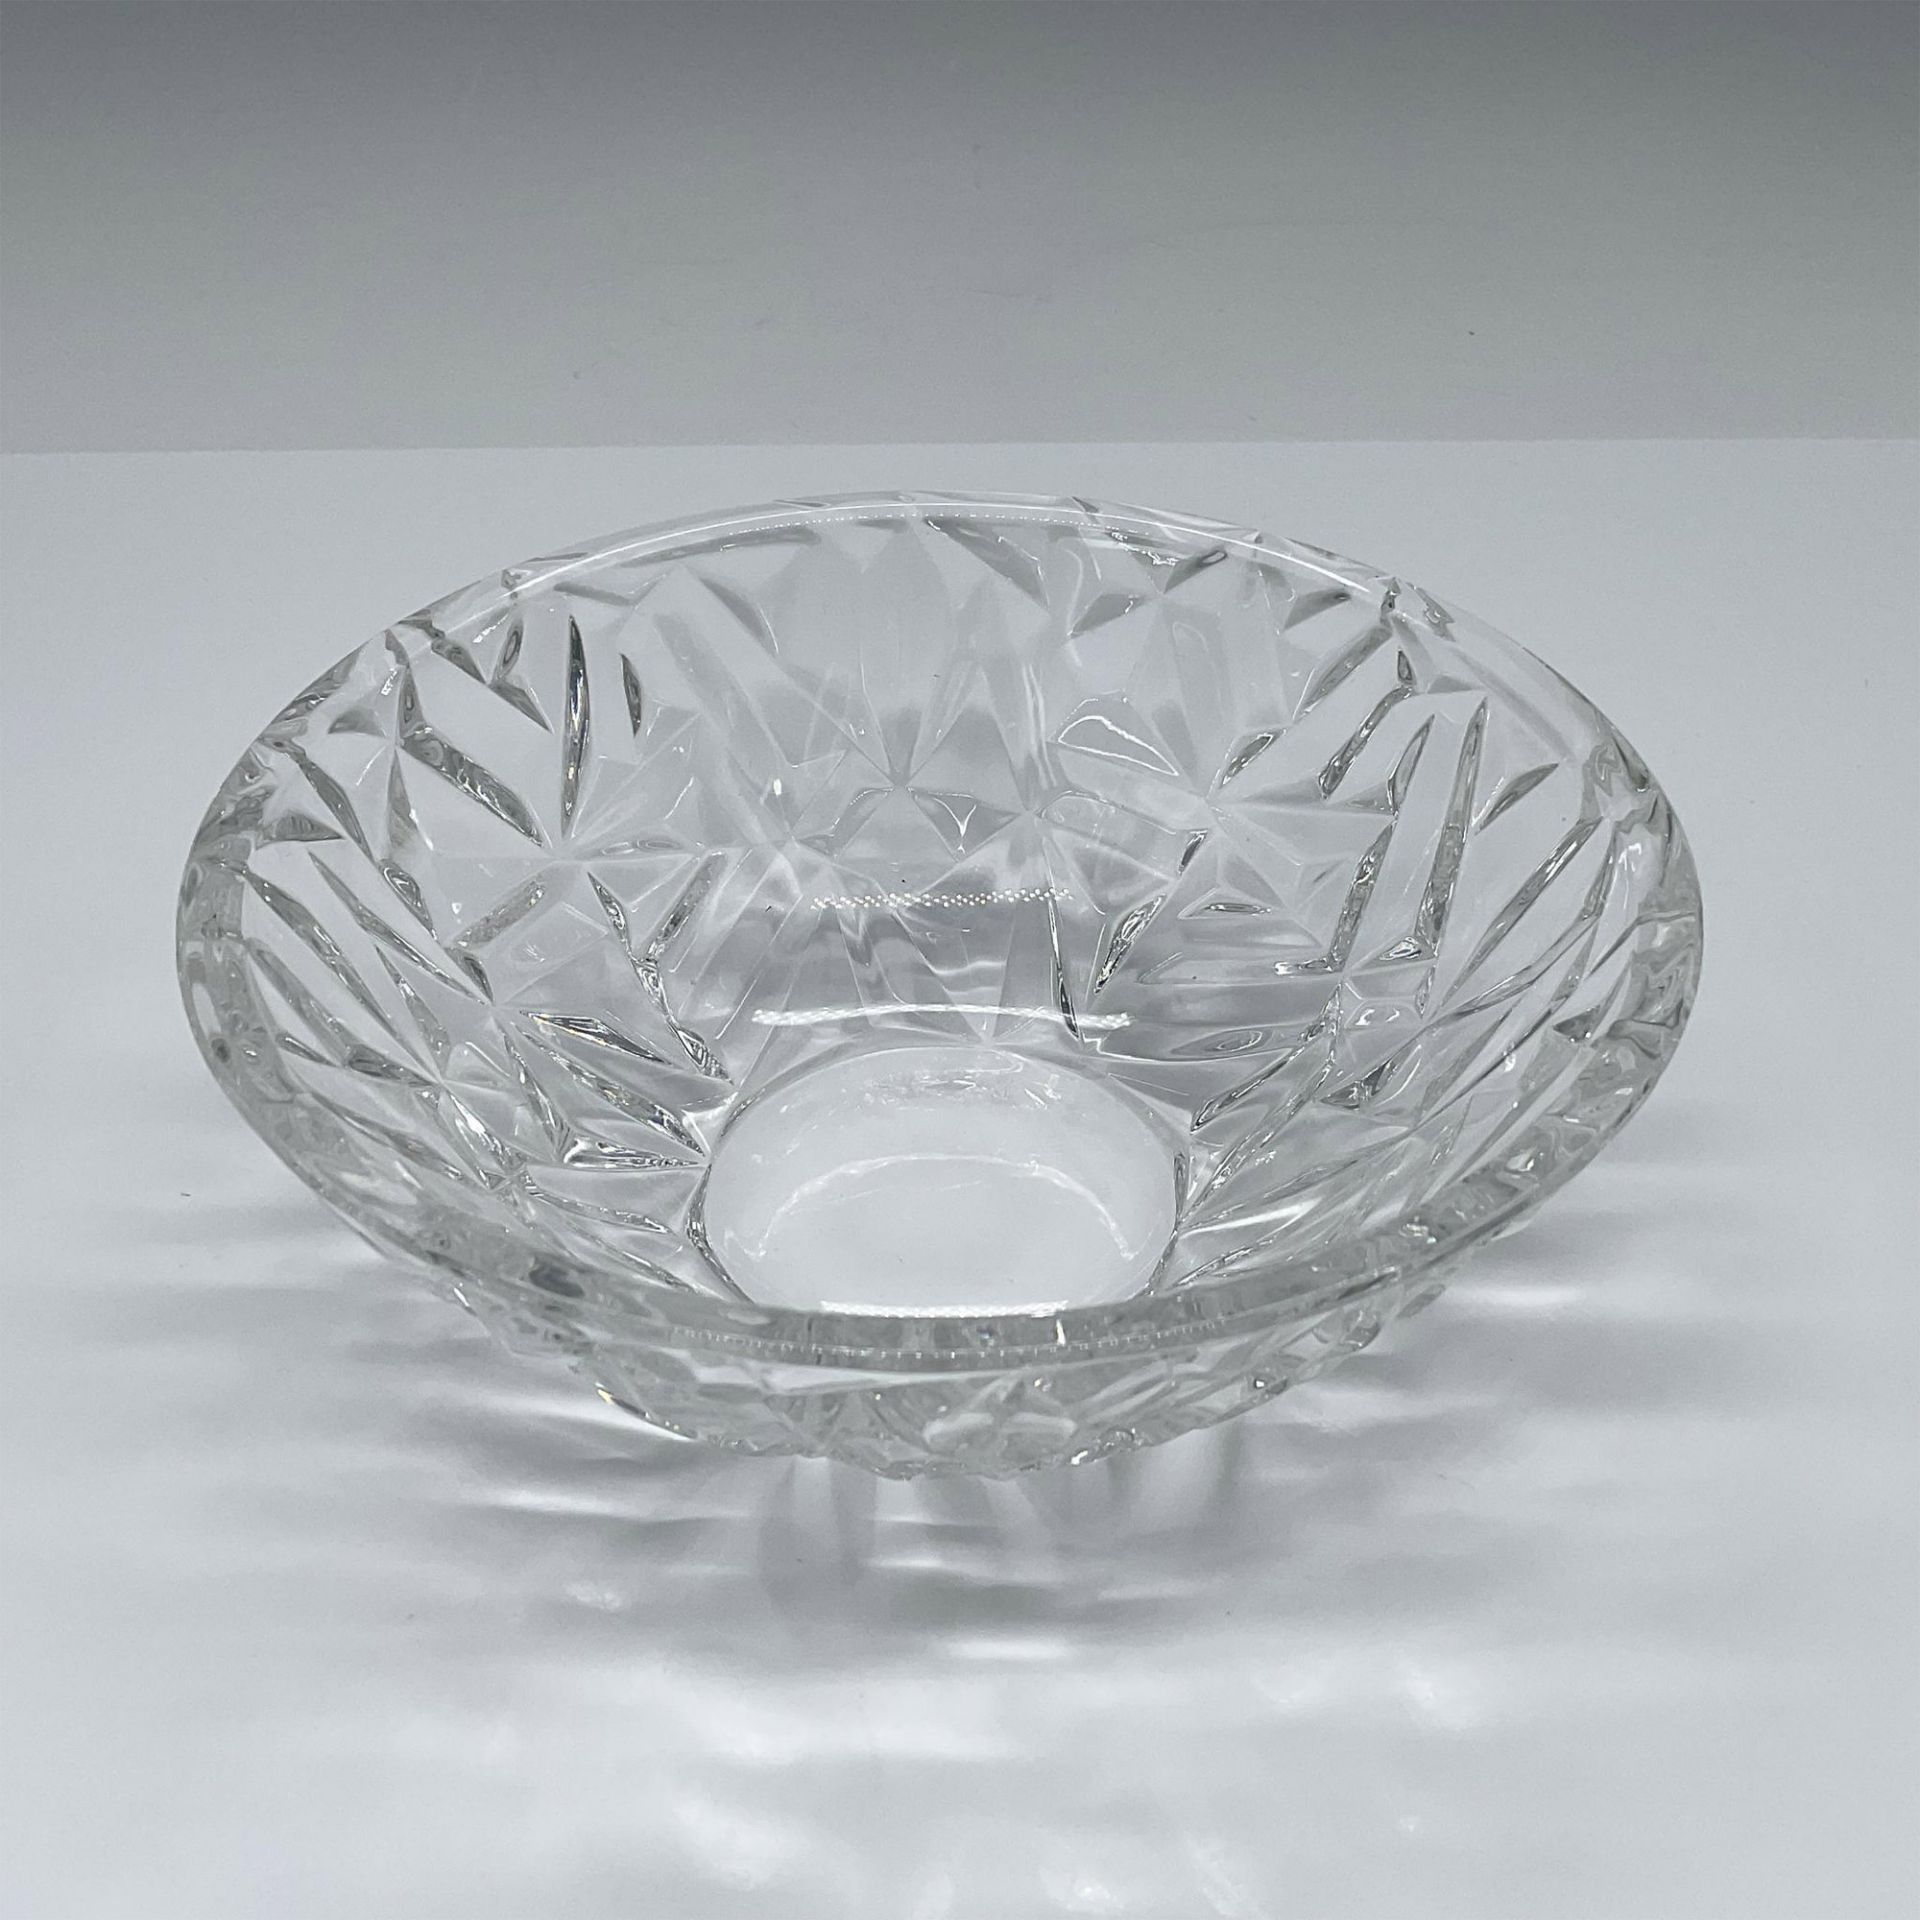 Tiffany and Co, Rock Cut Crystal Bowl - Image 2 of 4